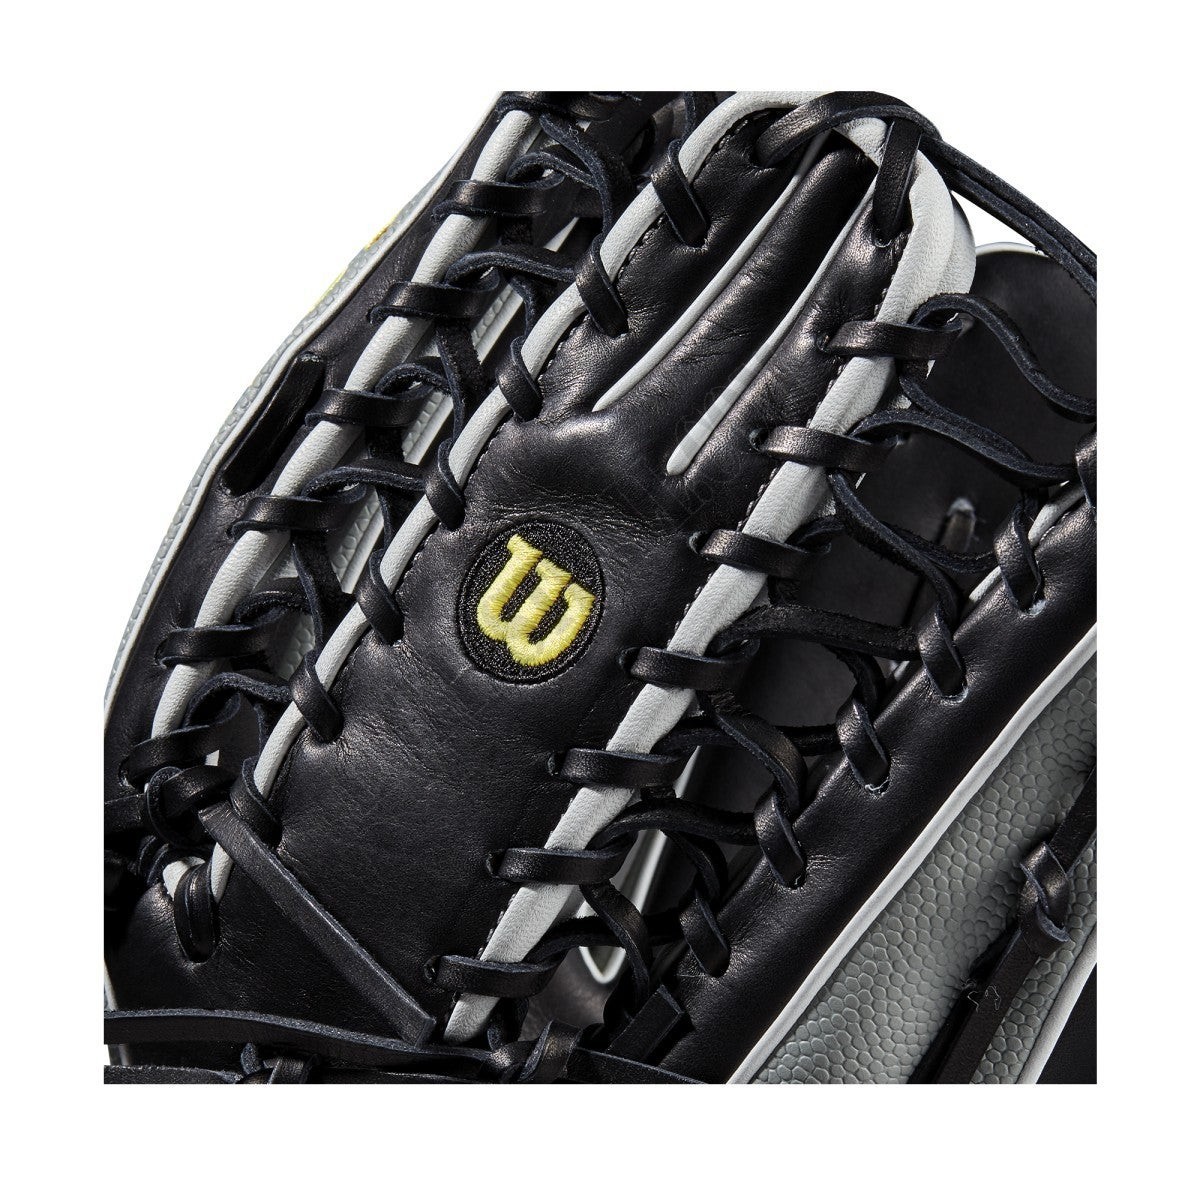 2020 A2000 OT6SS 12.75" Outfield Baseball Glove ● Wilson Promotions - -5